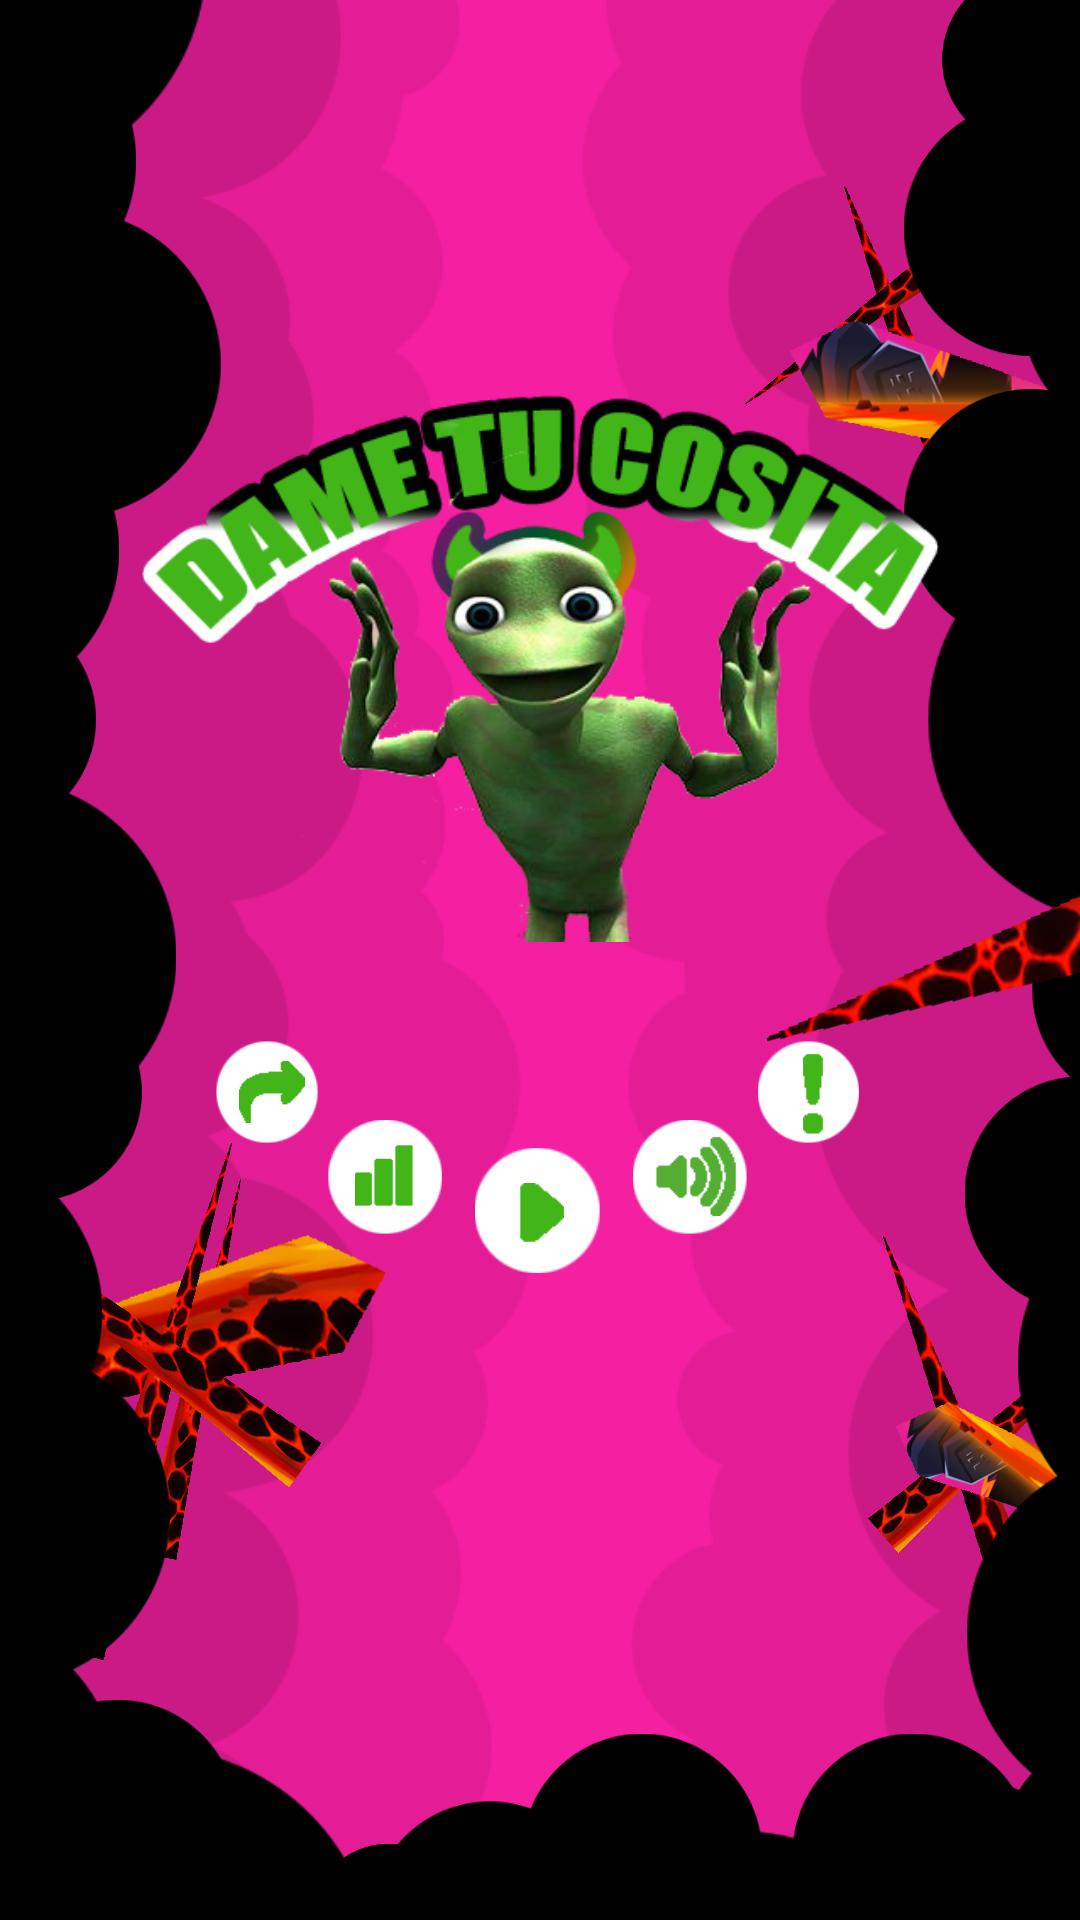 Dame Tu Cosita Jump Out For Android Apk Download - dame tu cosita roblox song id